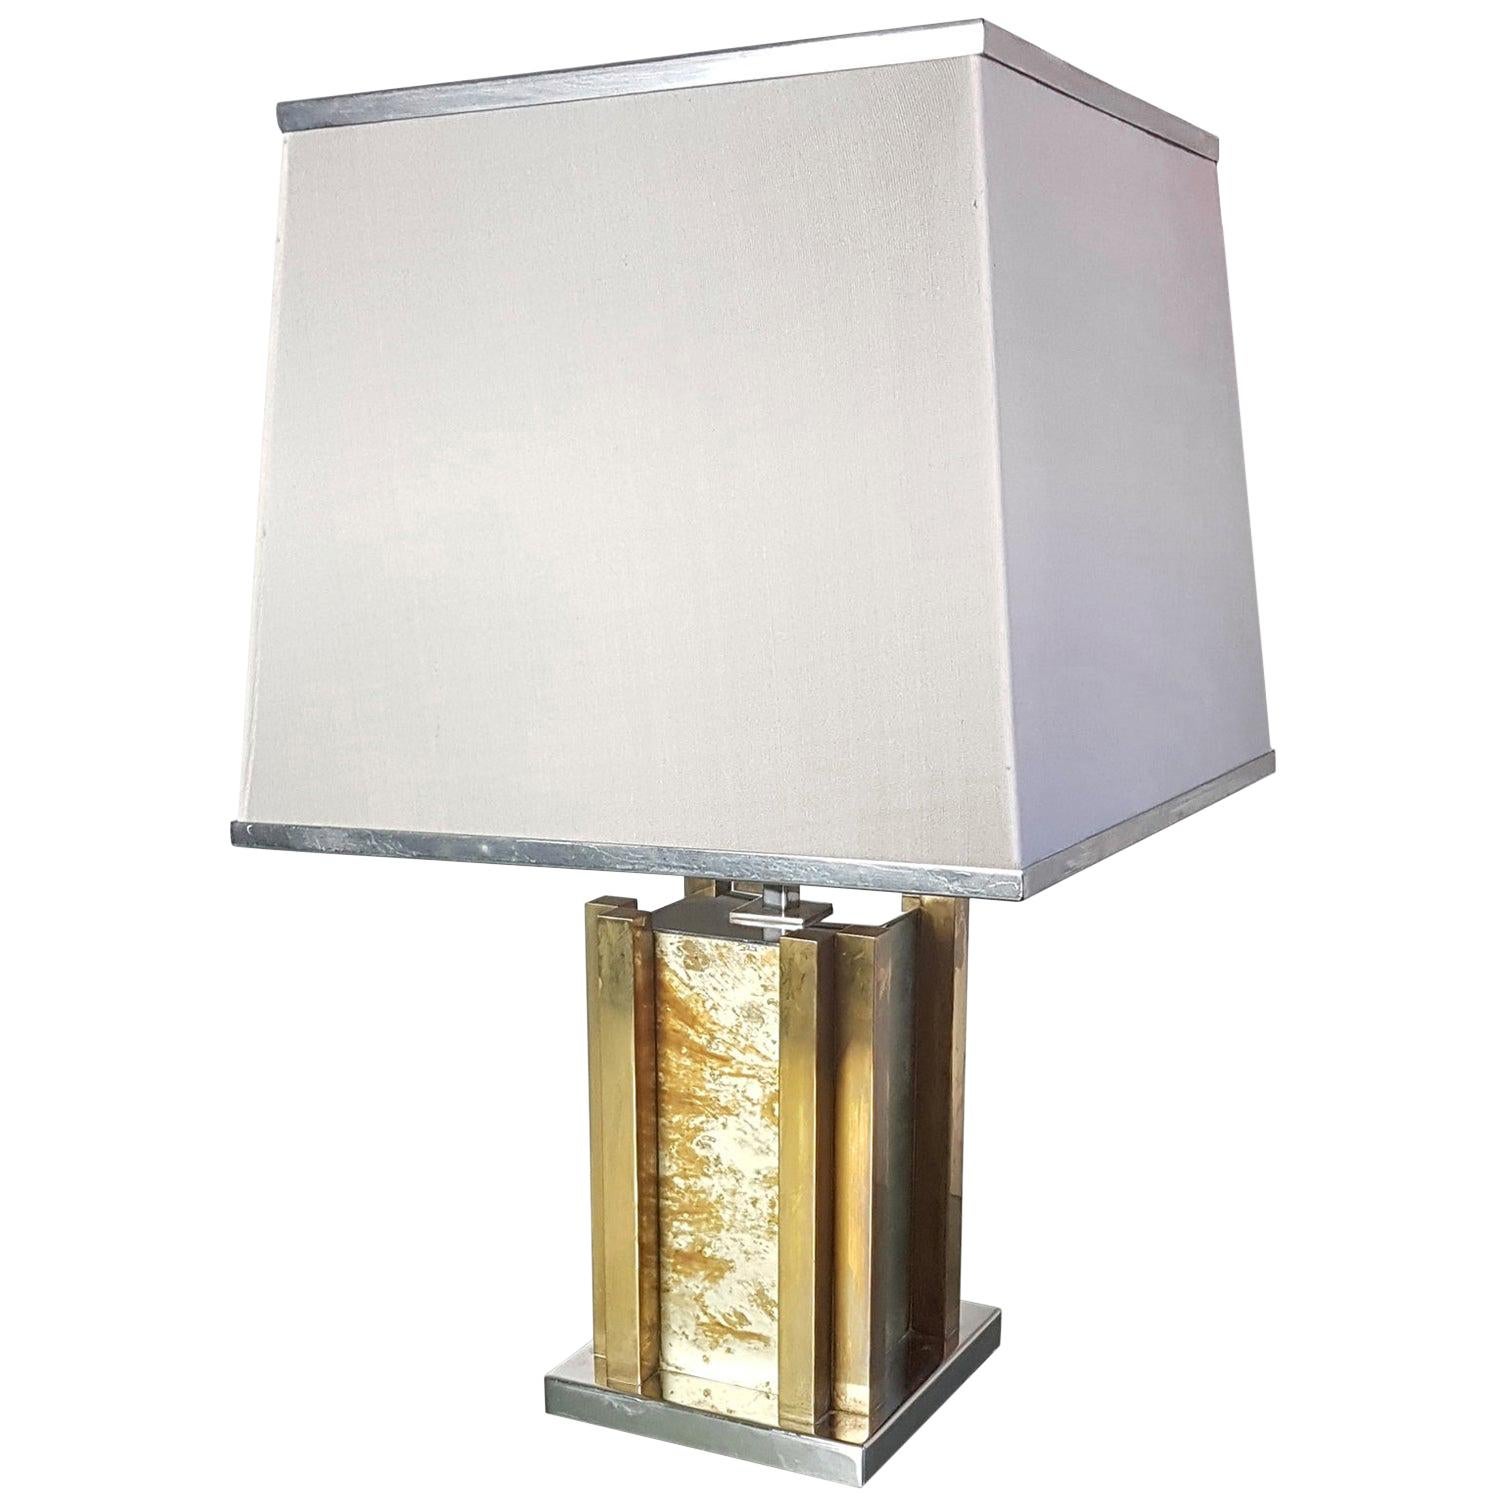 Romeo Rega Table Lamp in Brass and Chrome, Made in Italy